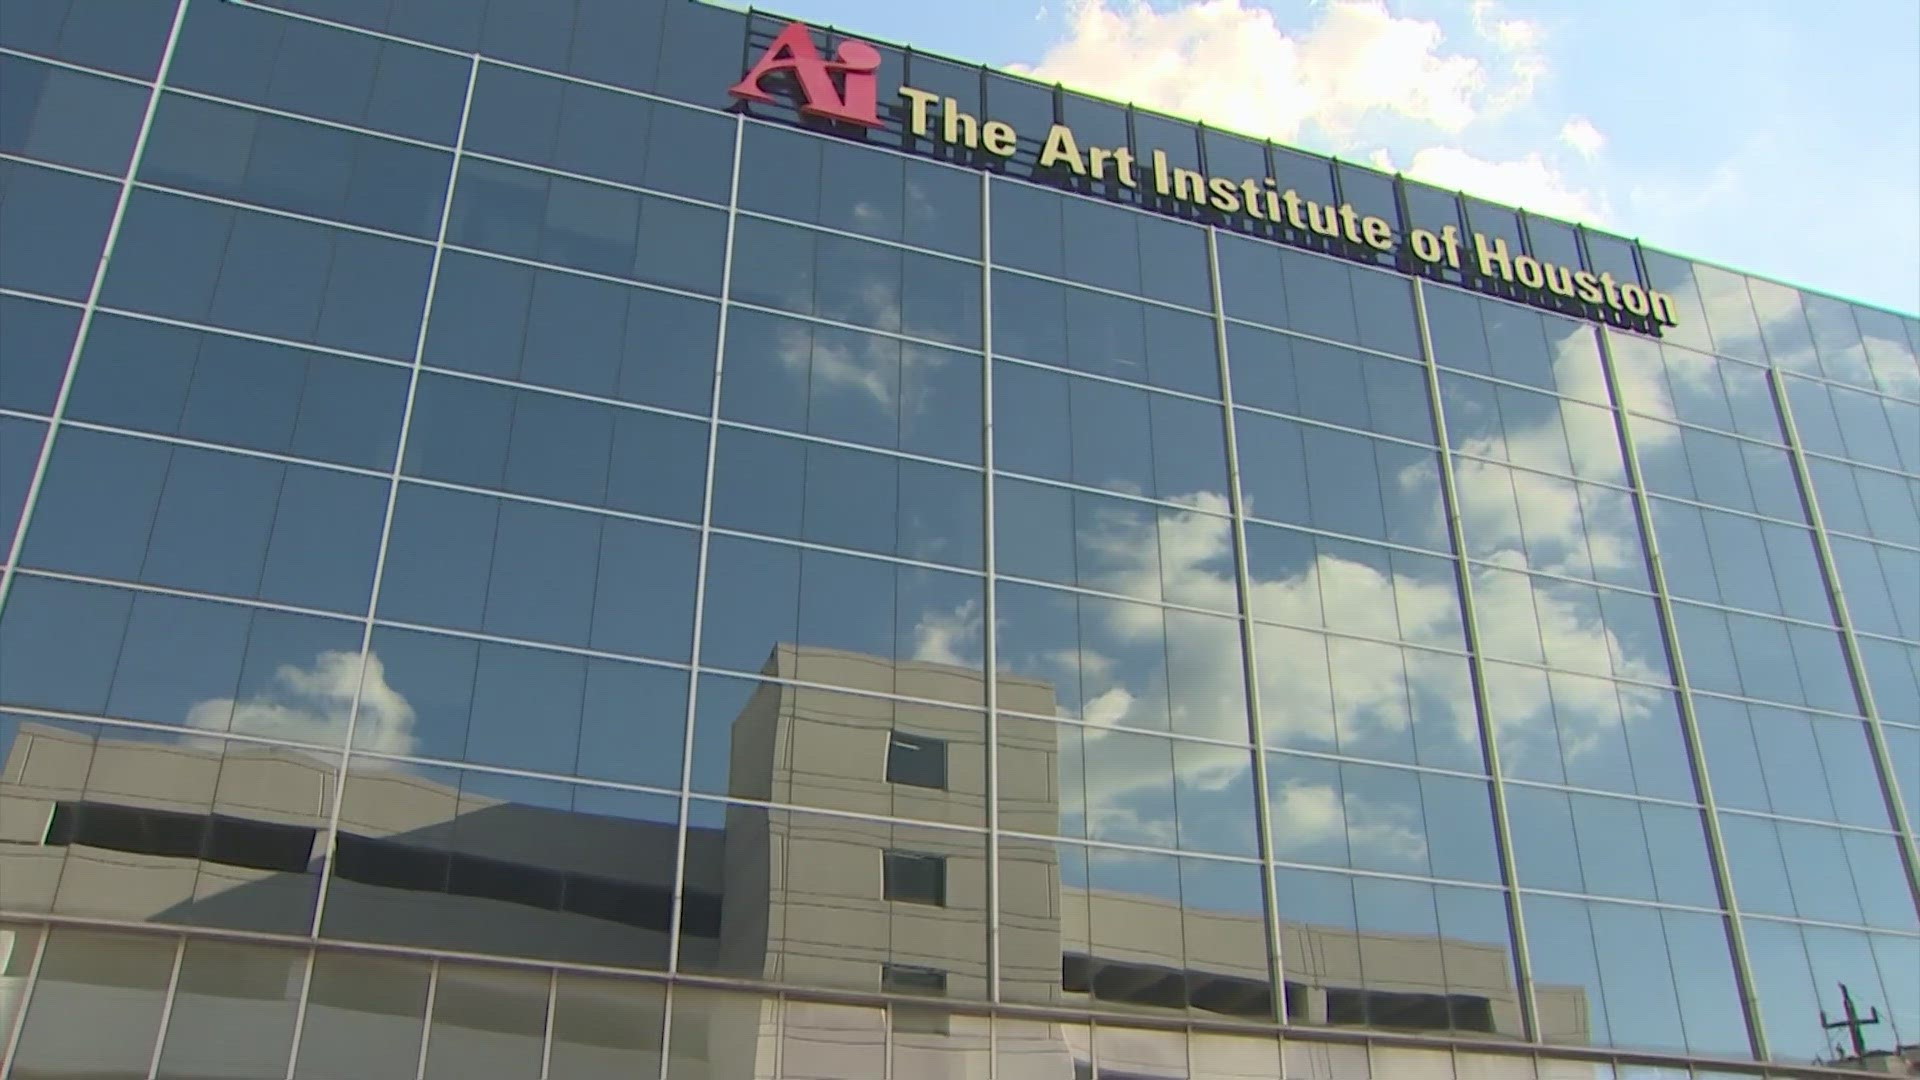 The Art Institute of Houston shut down all of its schools across Texas and the U.S. Friday, leaving hundreds of students in limbo.